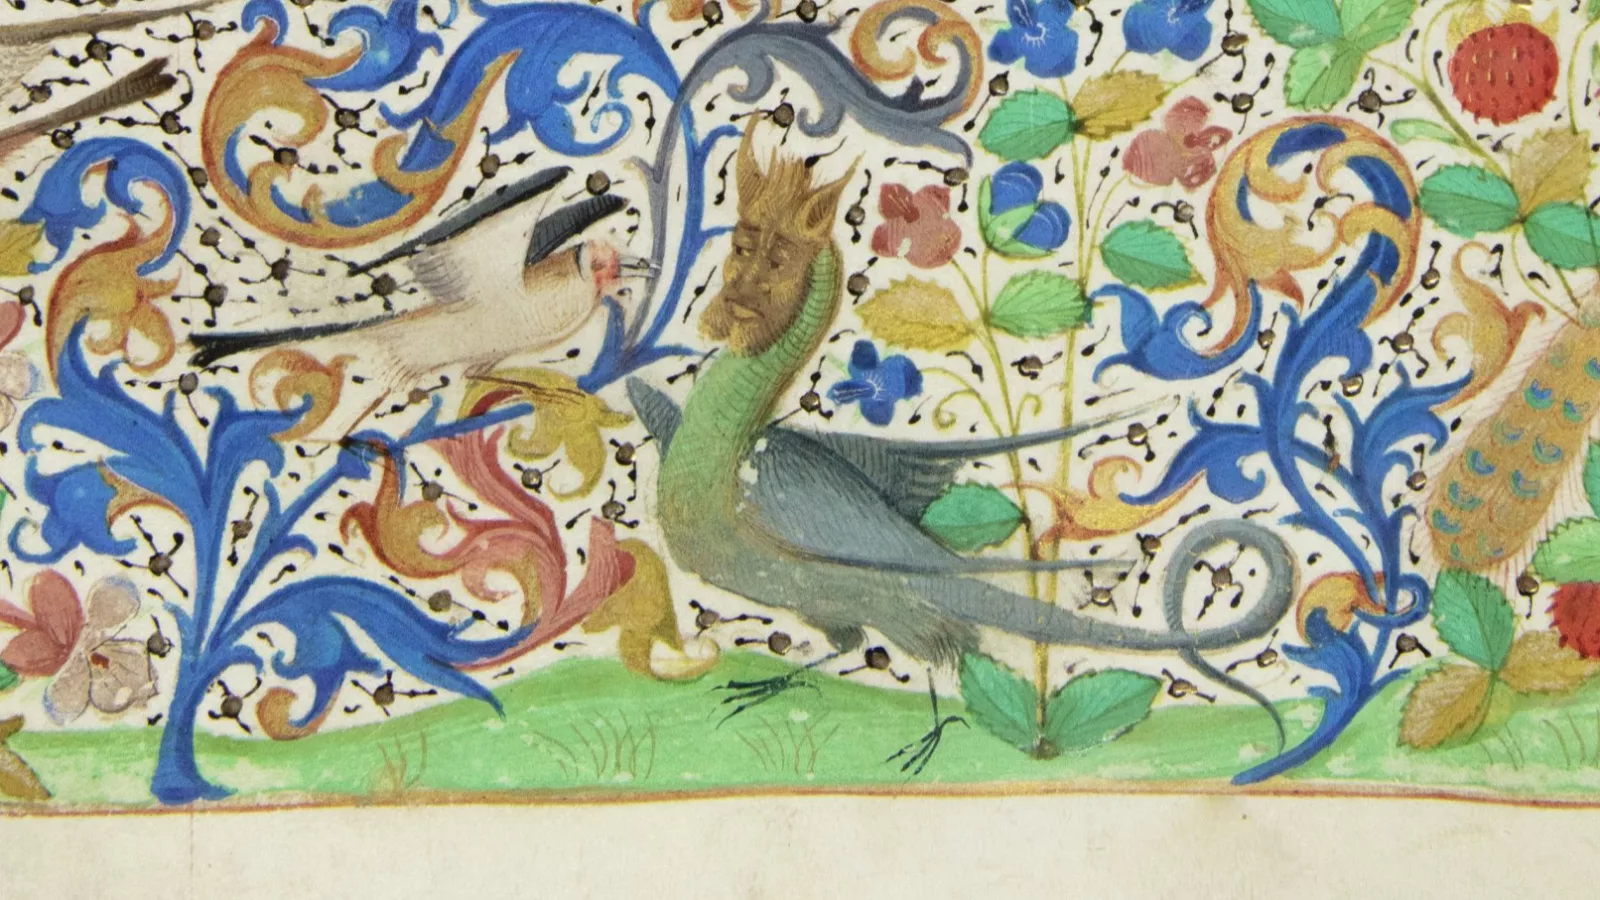 A creature with the body of a bird and the face of a man appears in the bottom margin of a medieval prayer book.